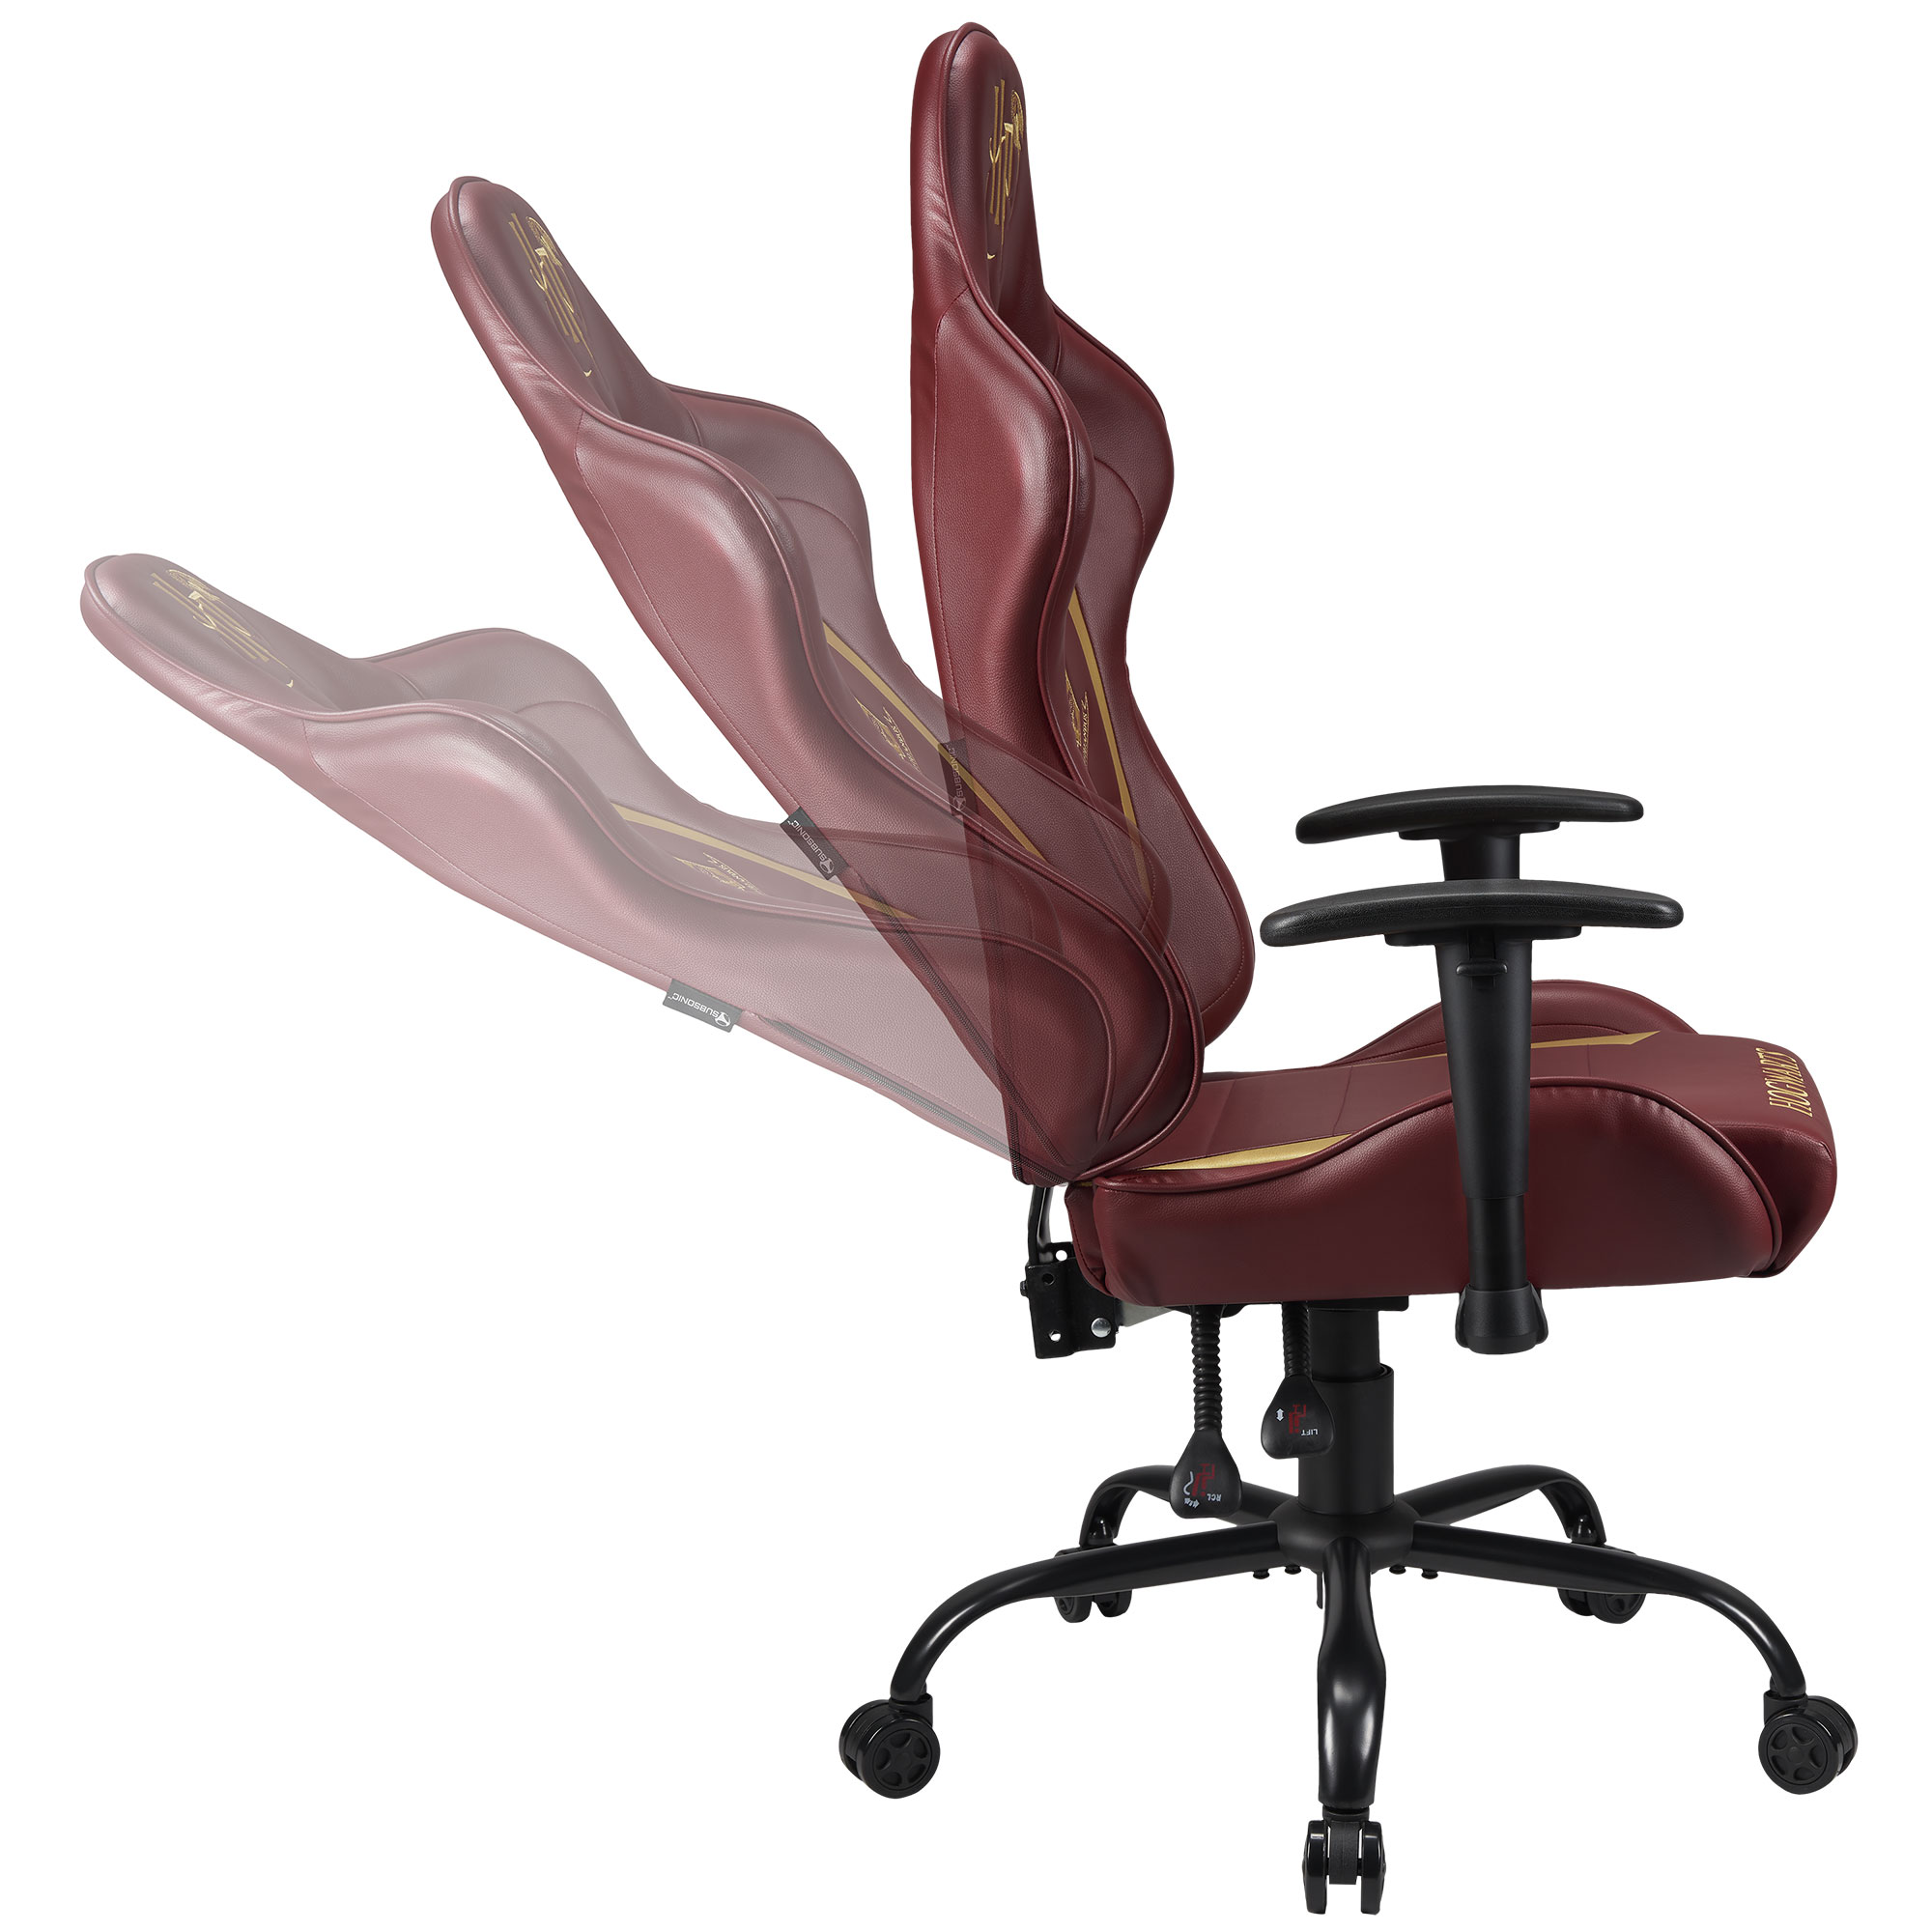 Gaming Chair Adult Hogwarts | Subsonic